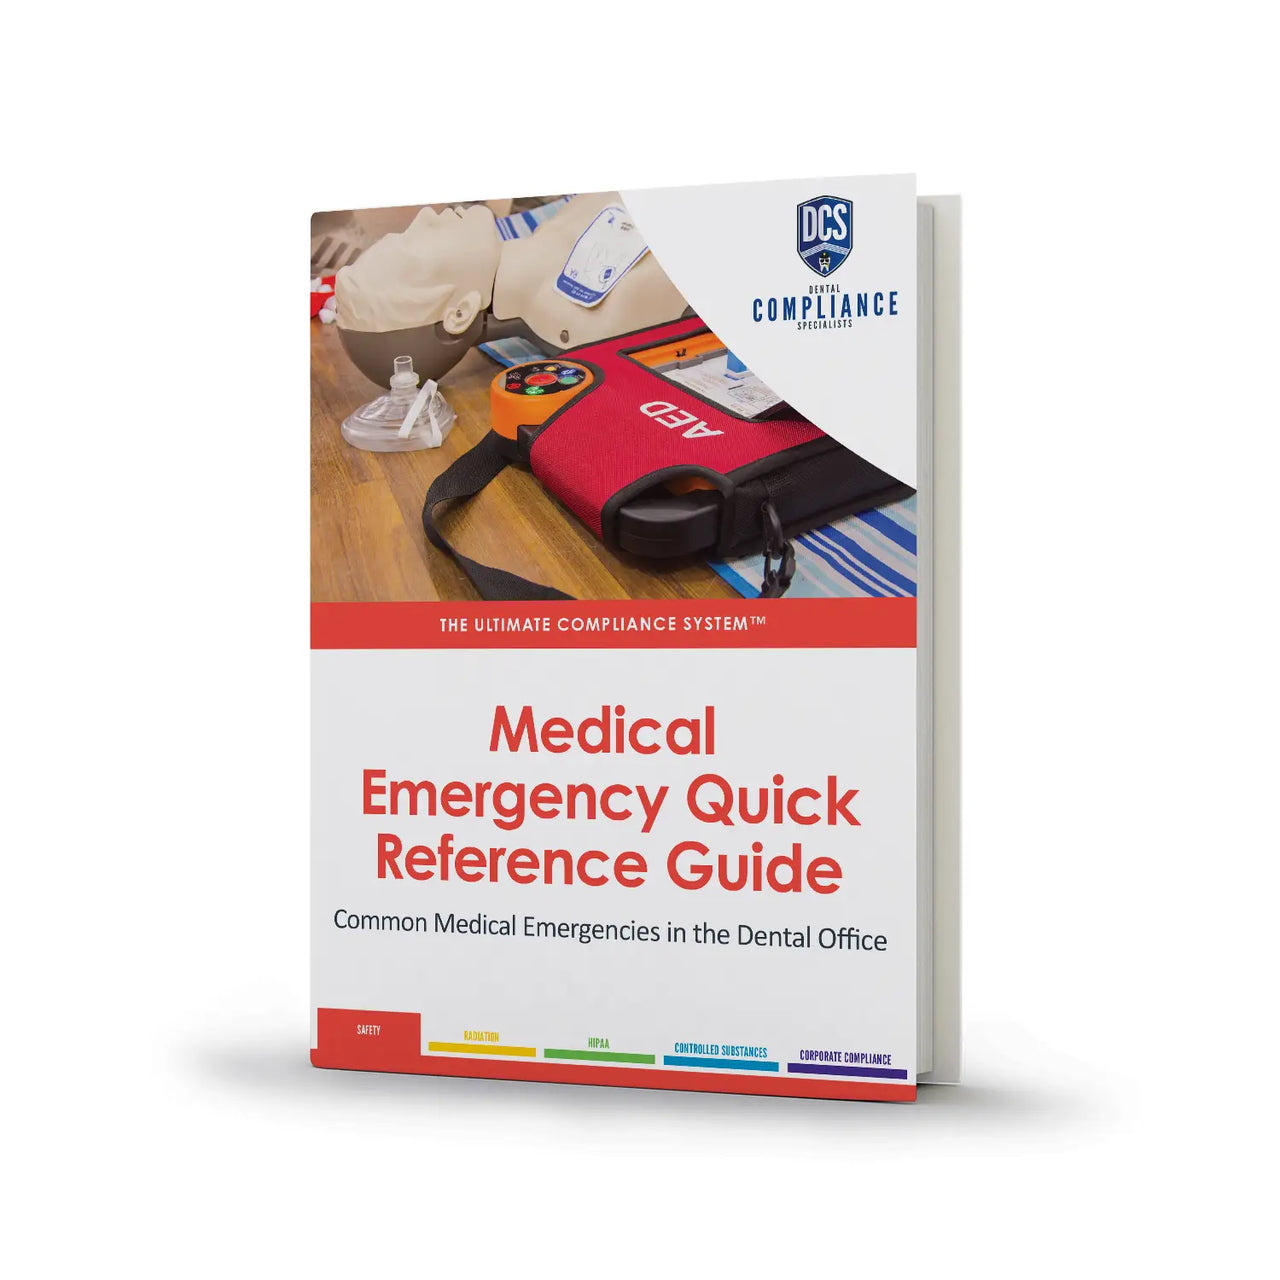 Medical Emergency Quick Reference Guide